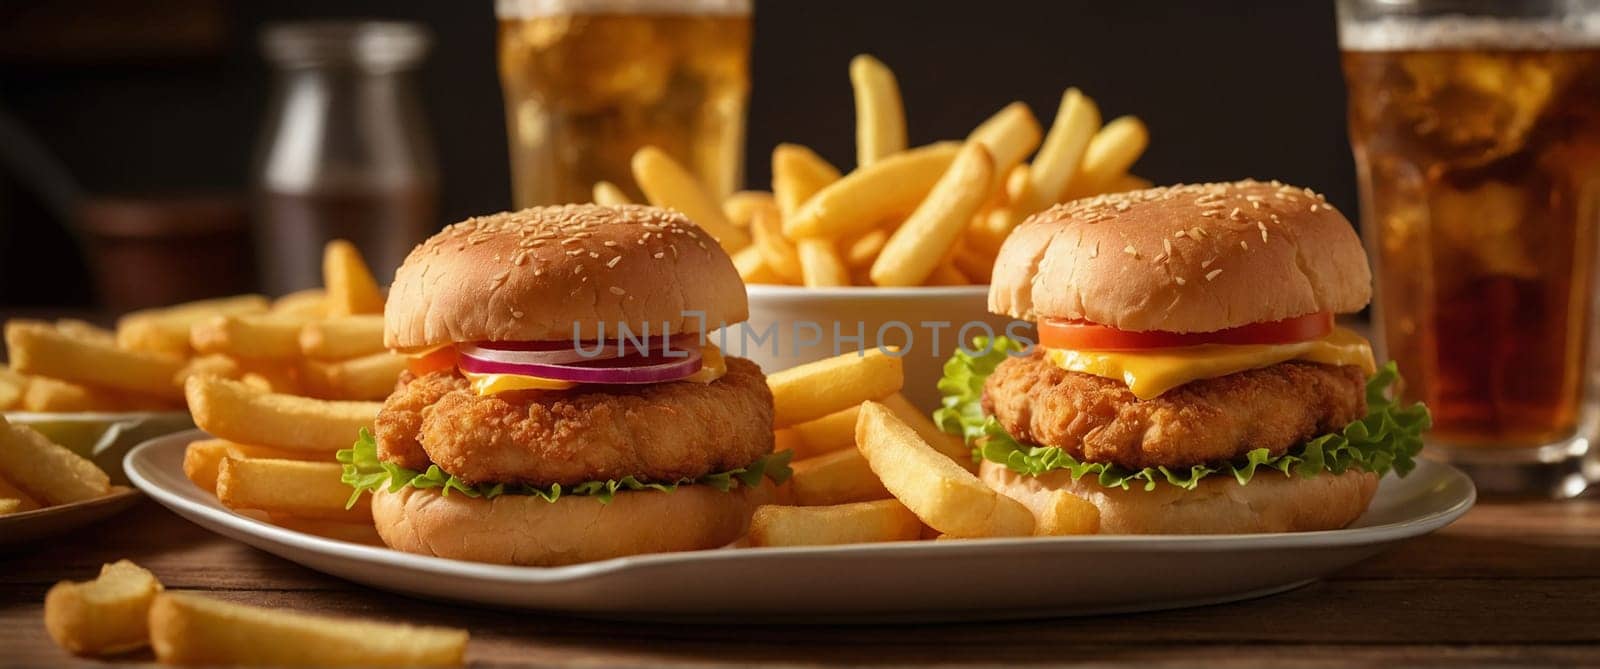 Fast-food dinner at home, burger, fries, chicken nuggets and soda, blurry background , bokeh effect by verbano